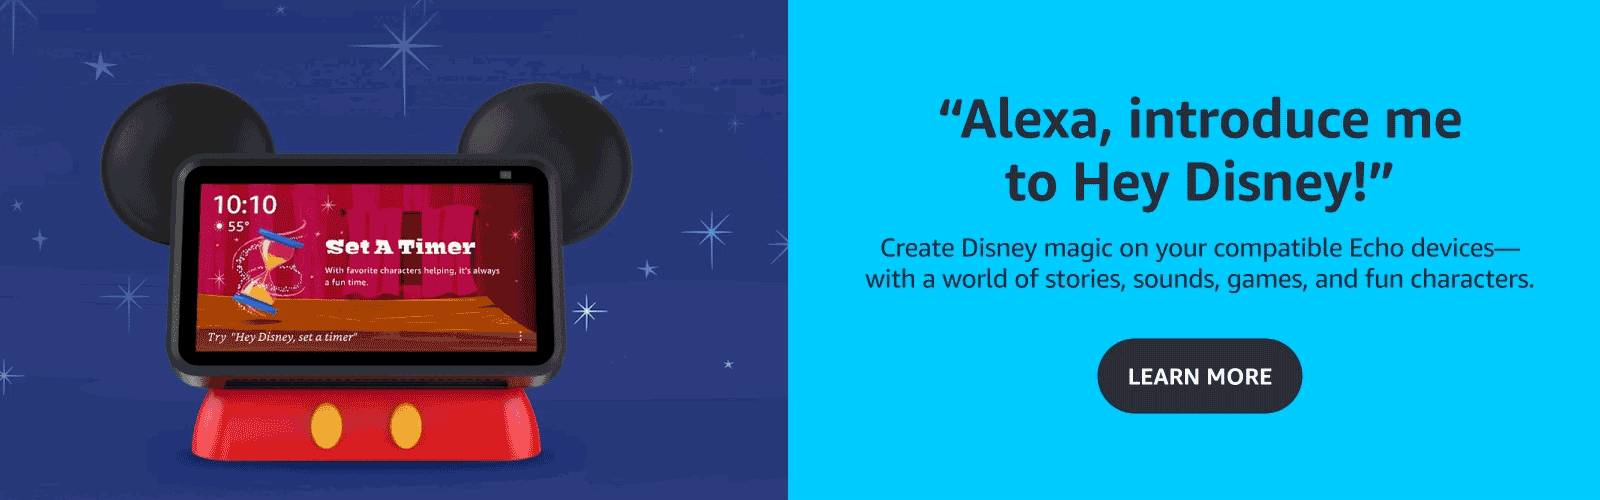 "Alexa, introduce me to Hey Disney!"

Create Disney magic on your compatible Echo deices- with a world of stories, sounds, games, and fun characters.

Learn more